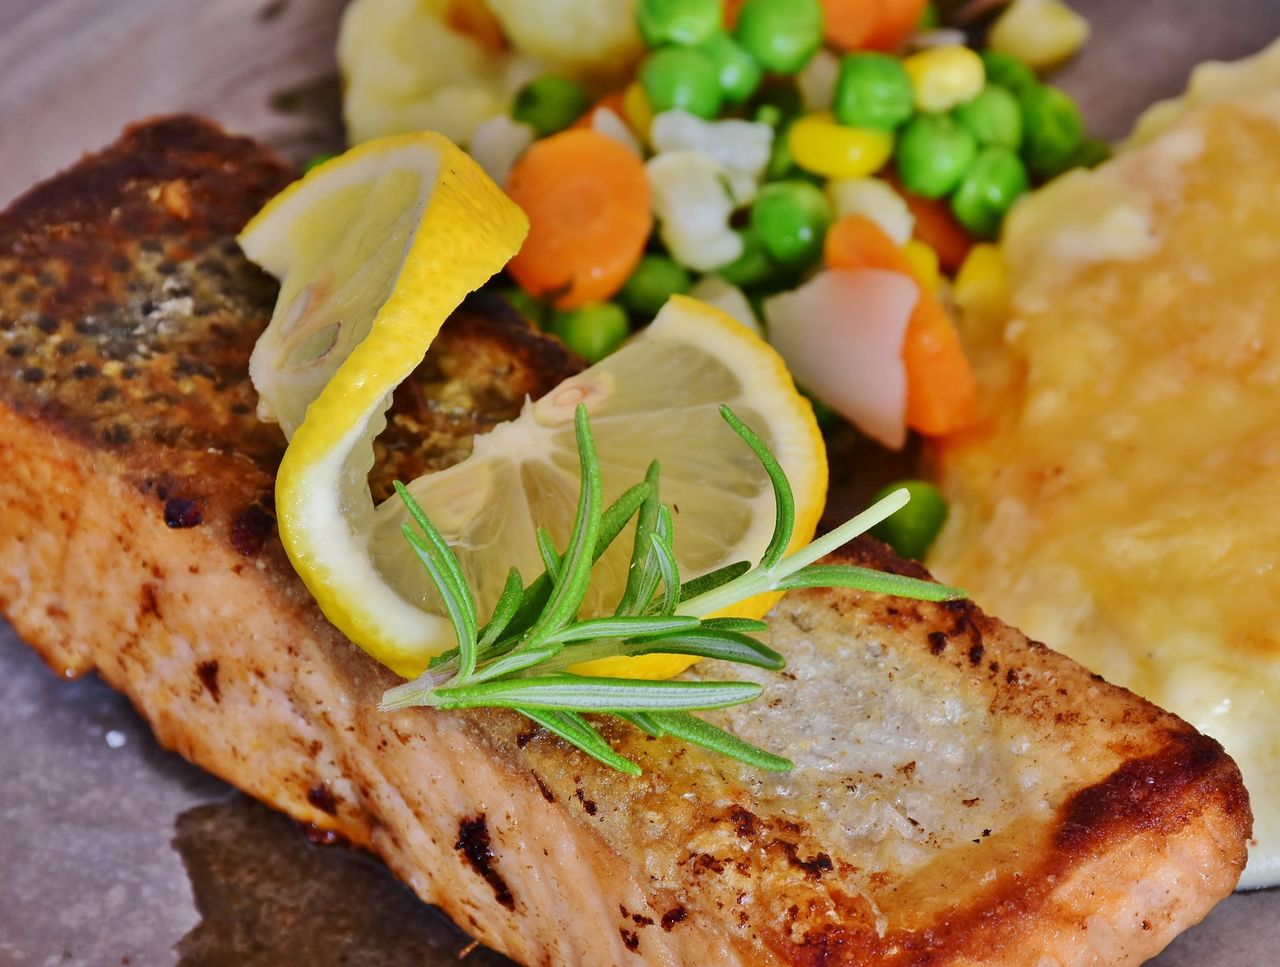 Kickstart your fasting season with this simple, healthy, baked fish and veggie recipe